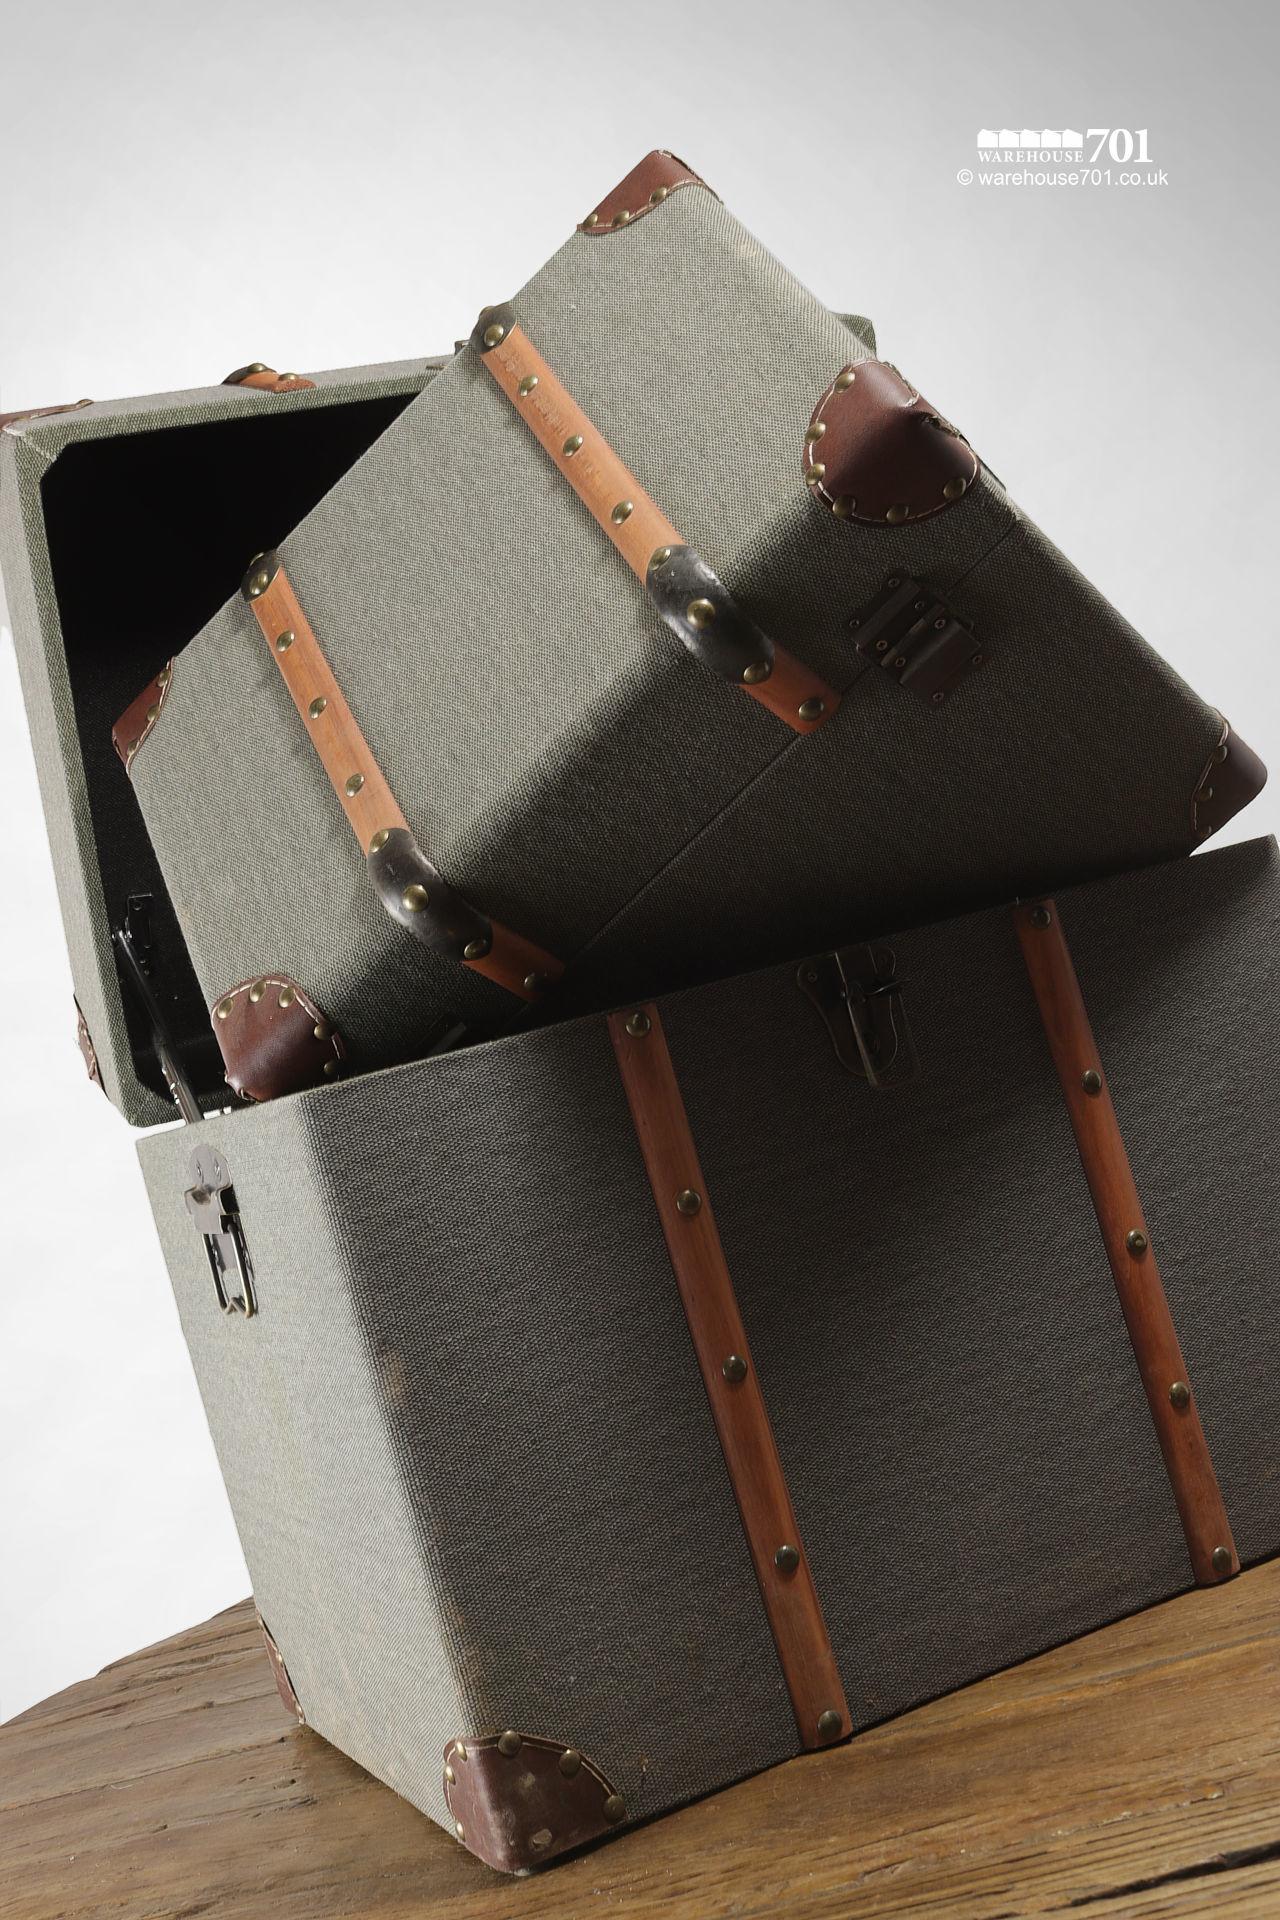 NEW Khaki Fabric Covered Storage Trunks with Leather and Wood Detailing #4